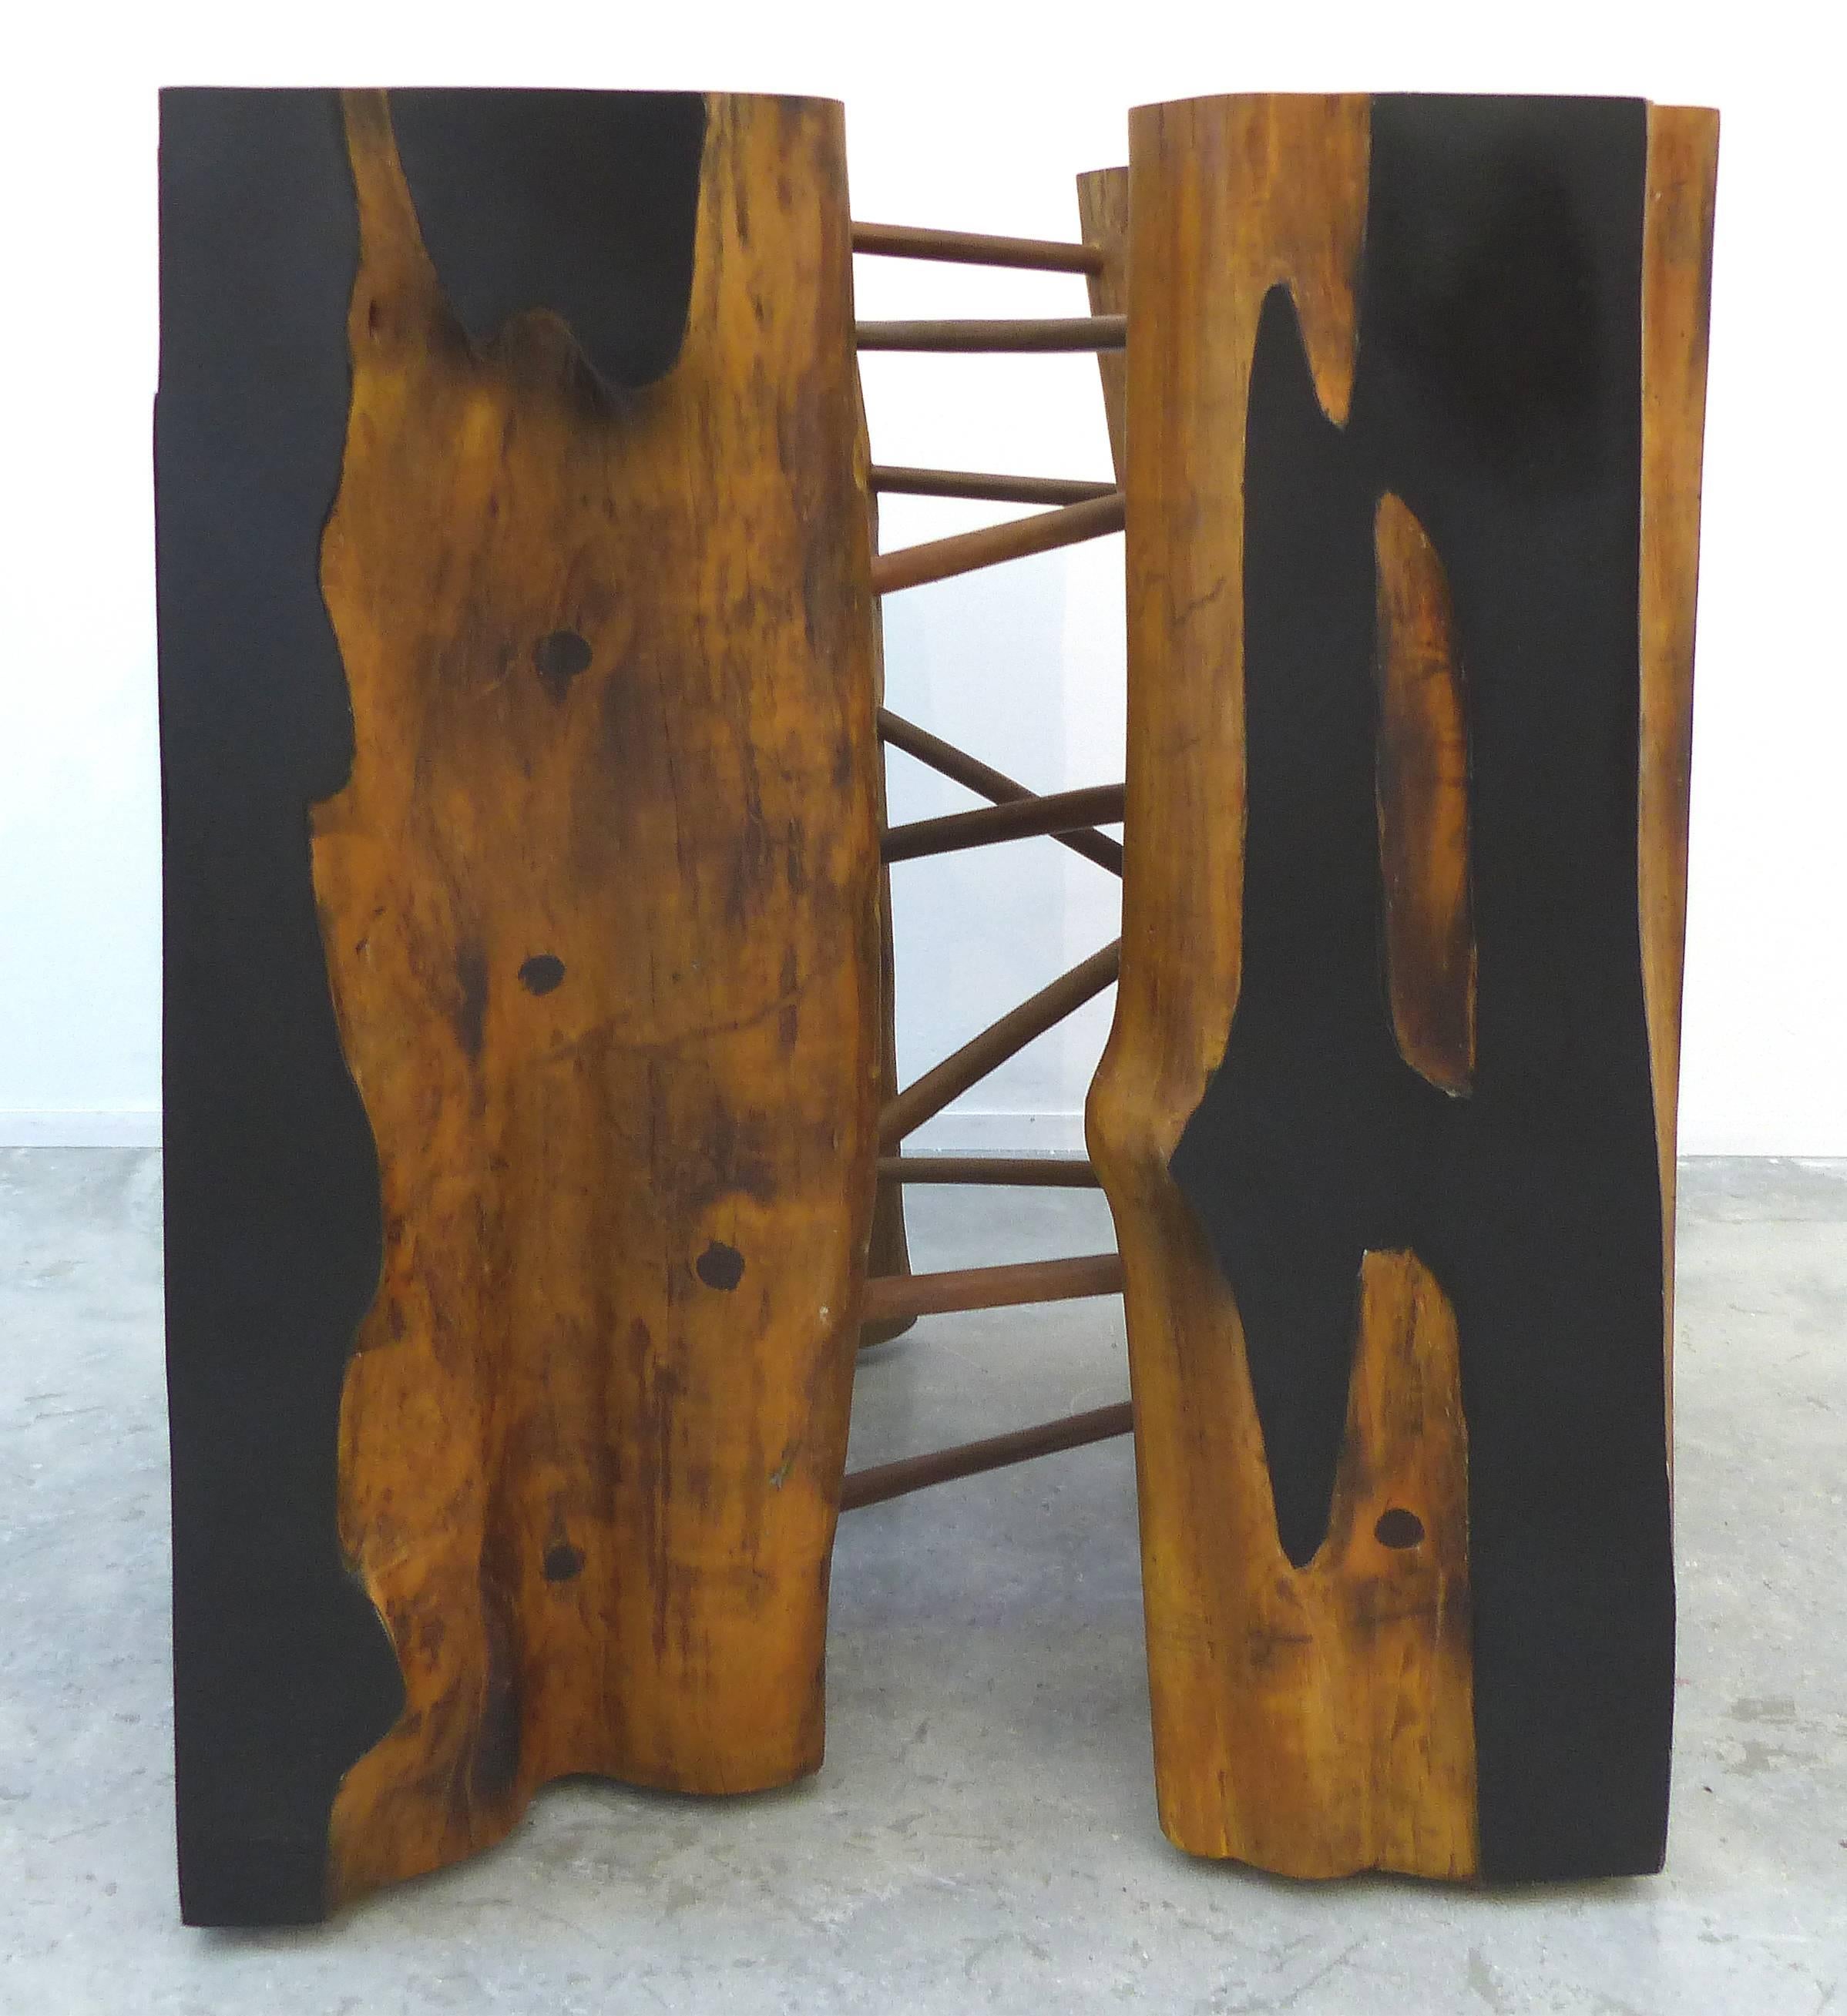 Brazilian Reclaimed Amazon Guaranta Wood Table Base by Artist Valeria Totti

Offered is a Brazilian Guaranta wood table base by Valeria Totti. The artist has embellished this found piece of wood from the Amazon by adding wood dowels and painting the